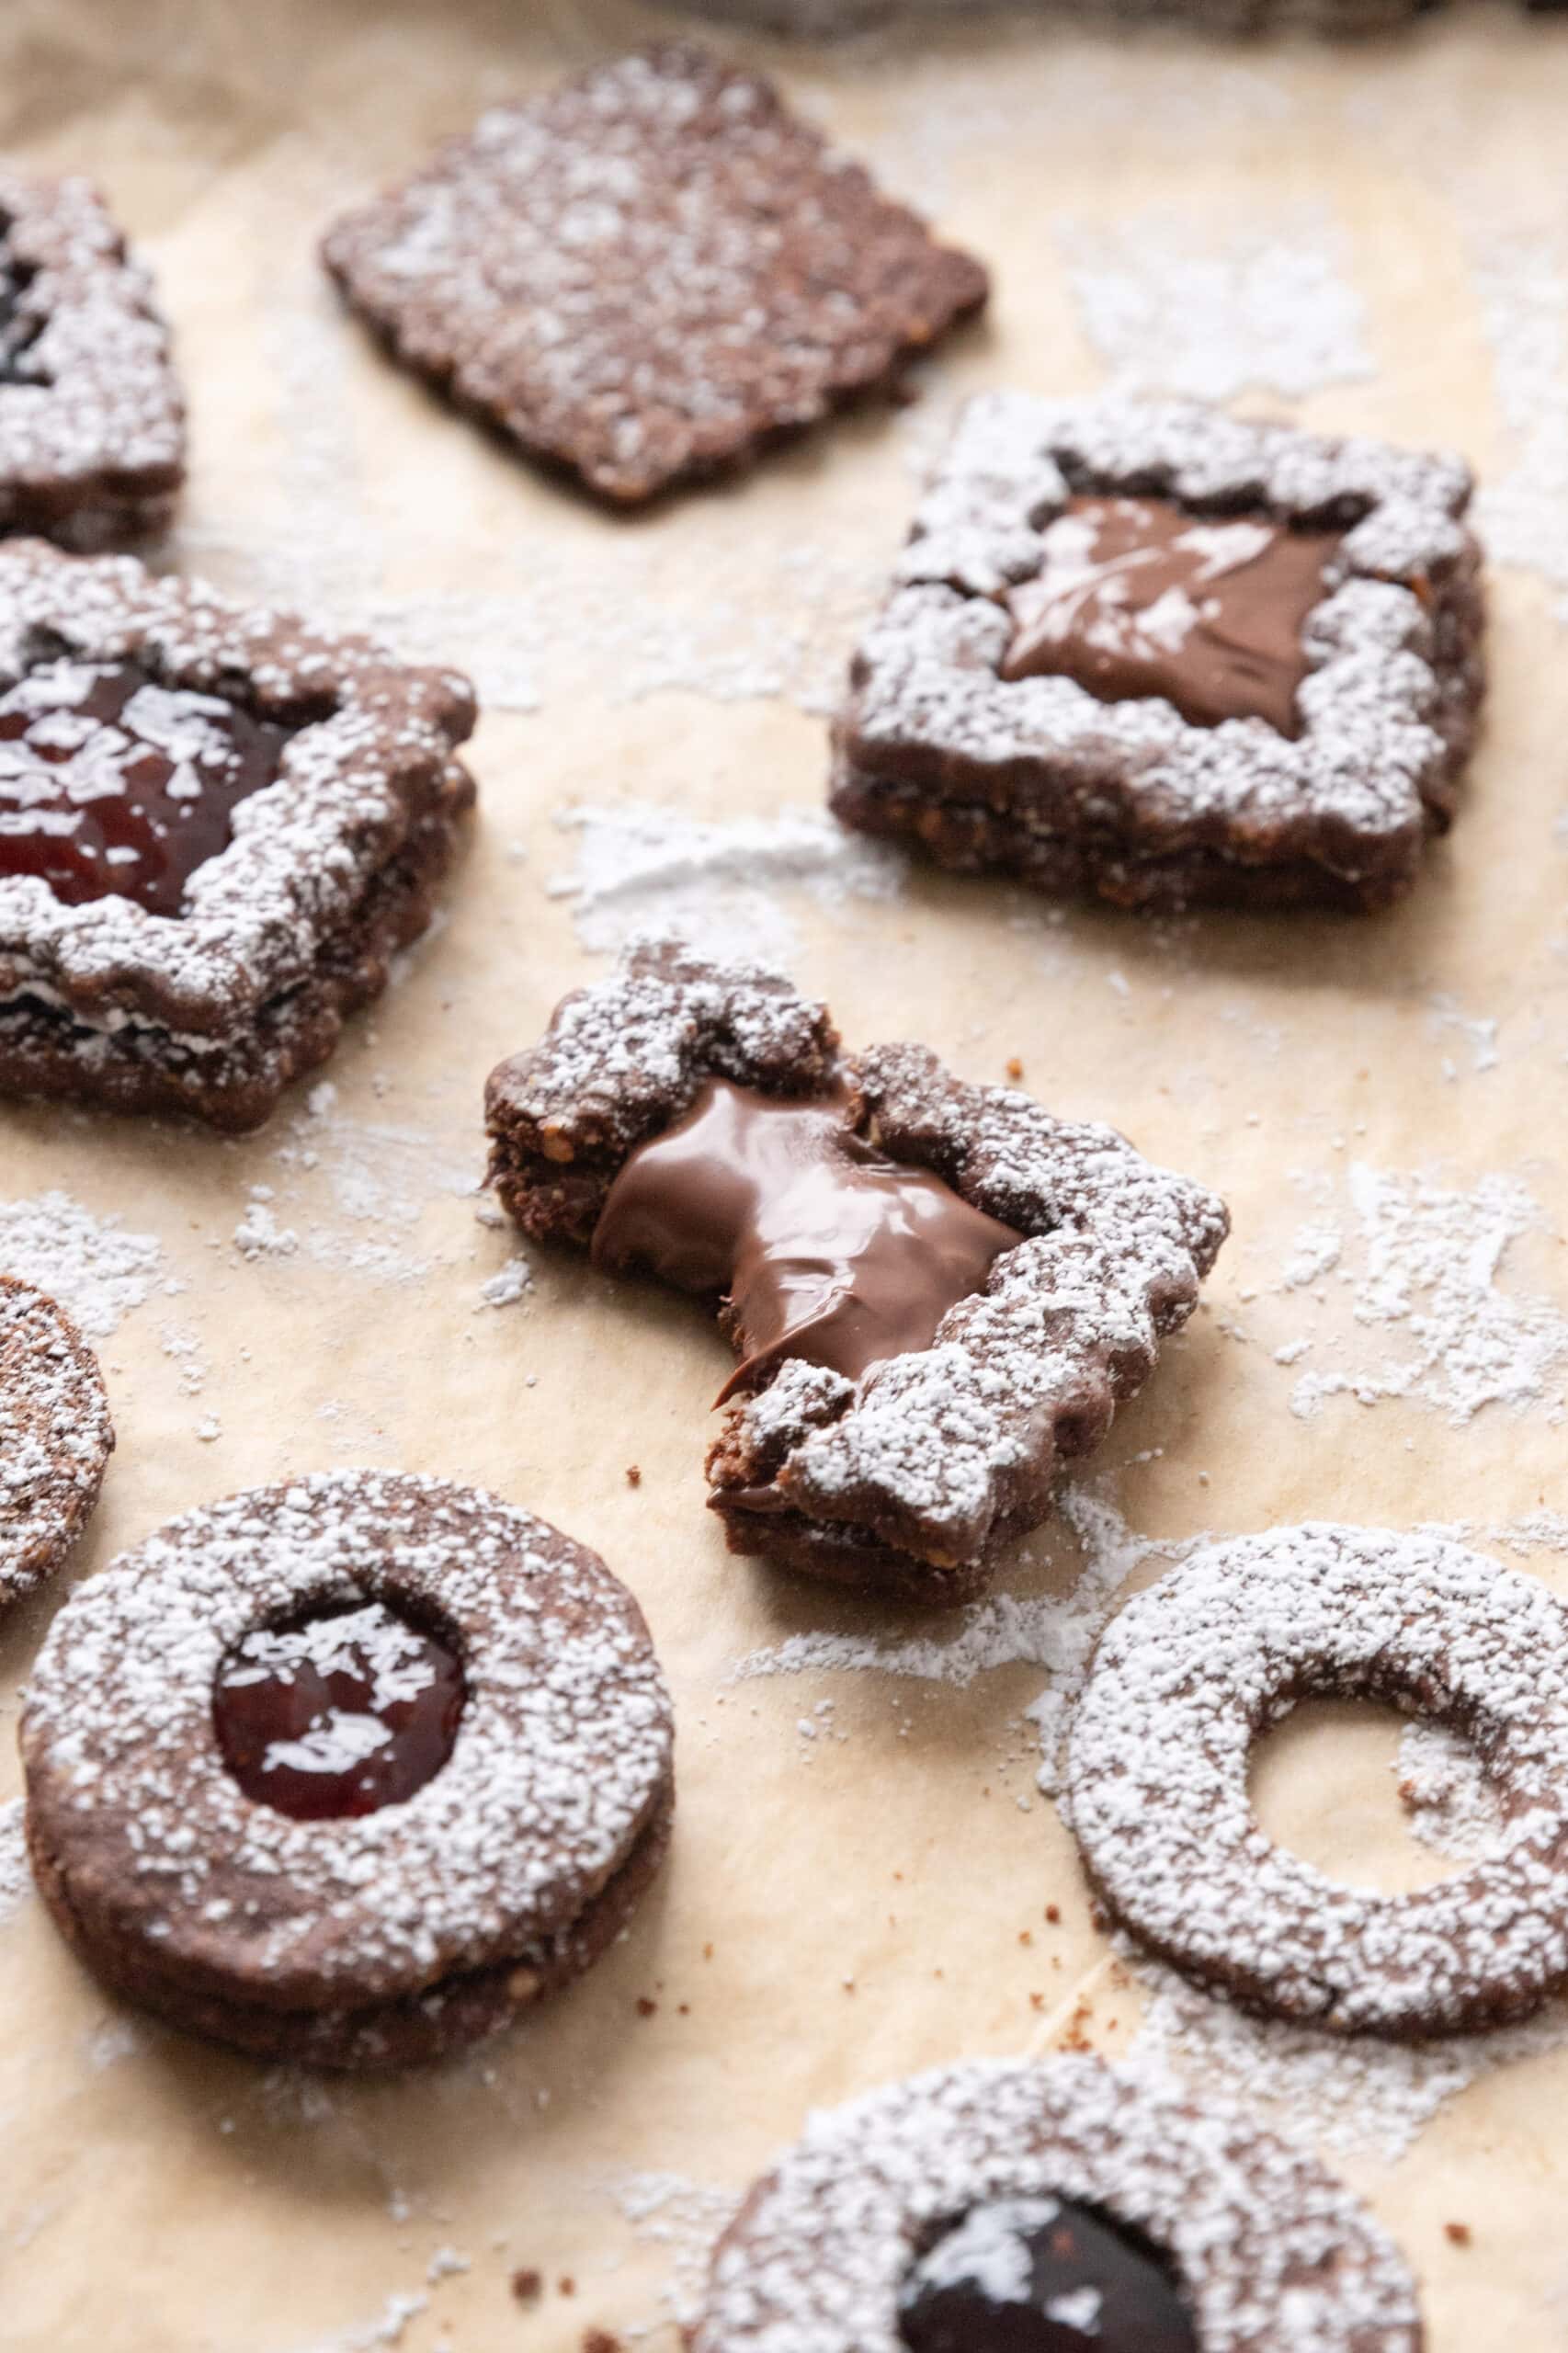 A parchment lined sheet pan topped with multiple Chocolate linzer cookies and one that has a bite taken out of it.